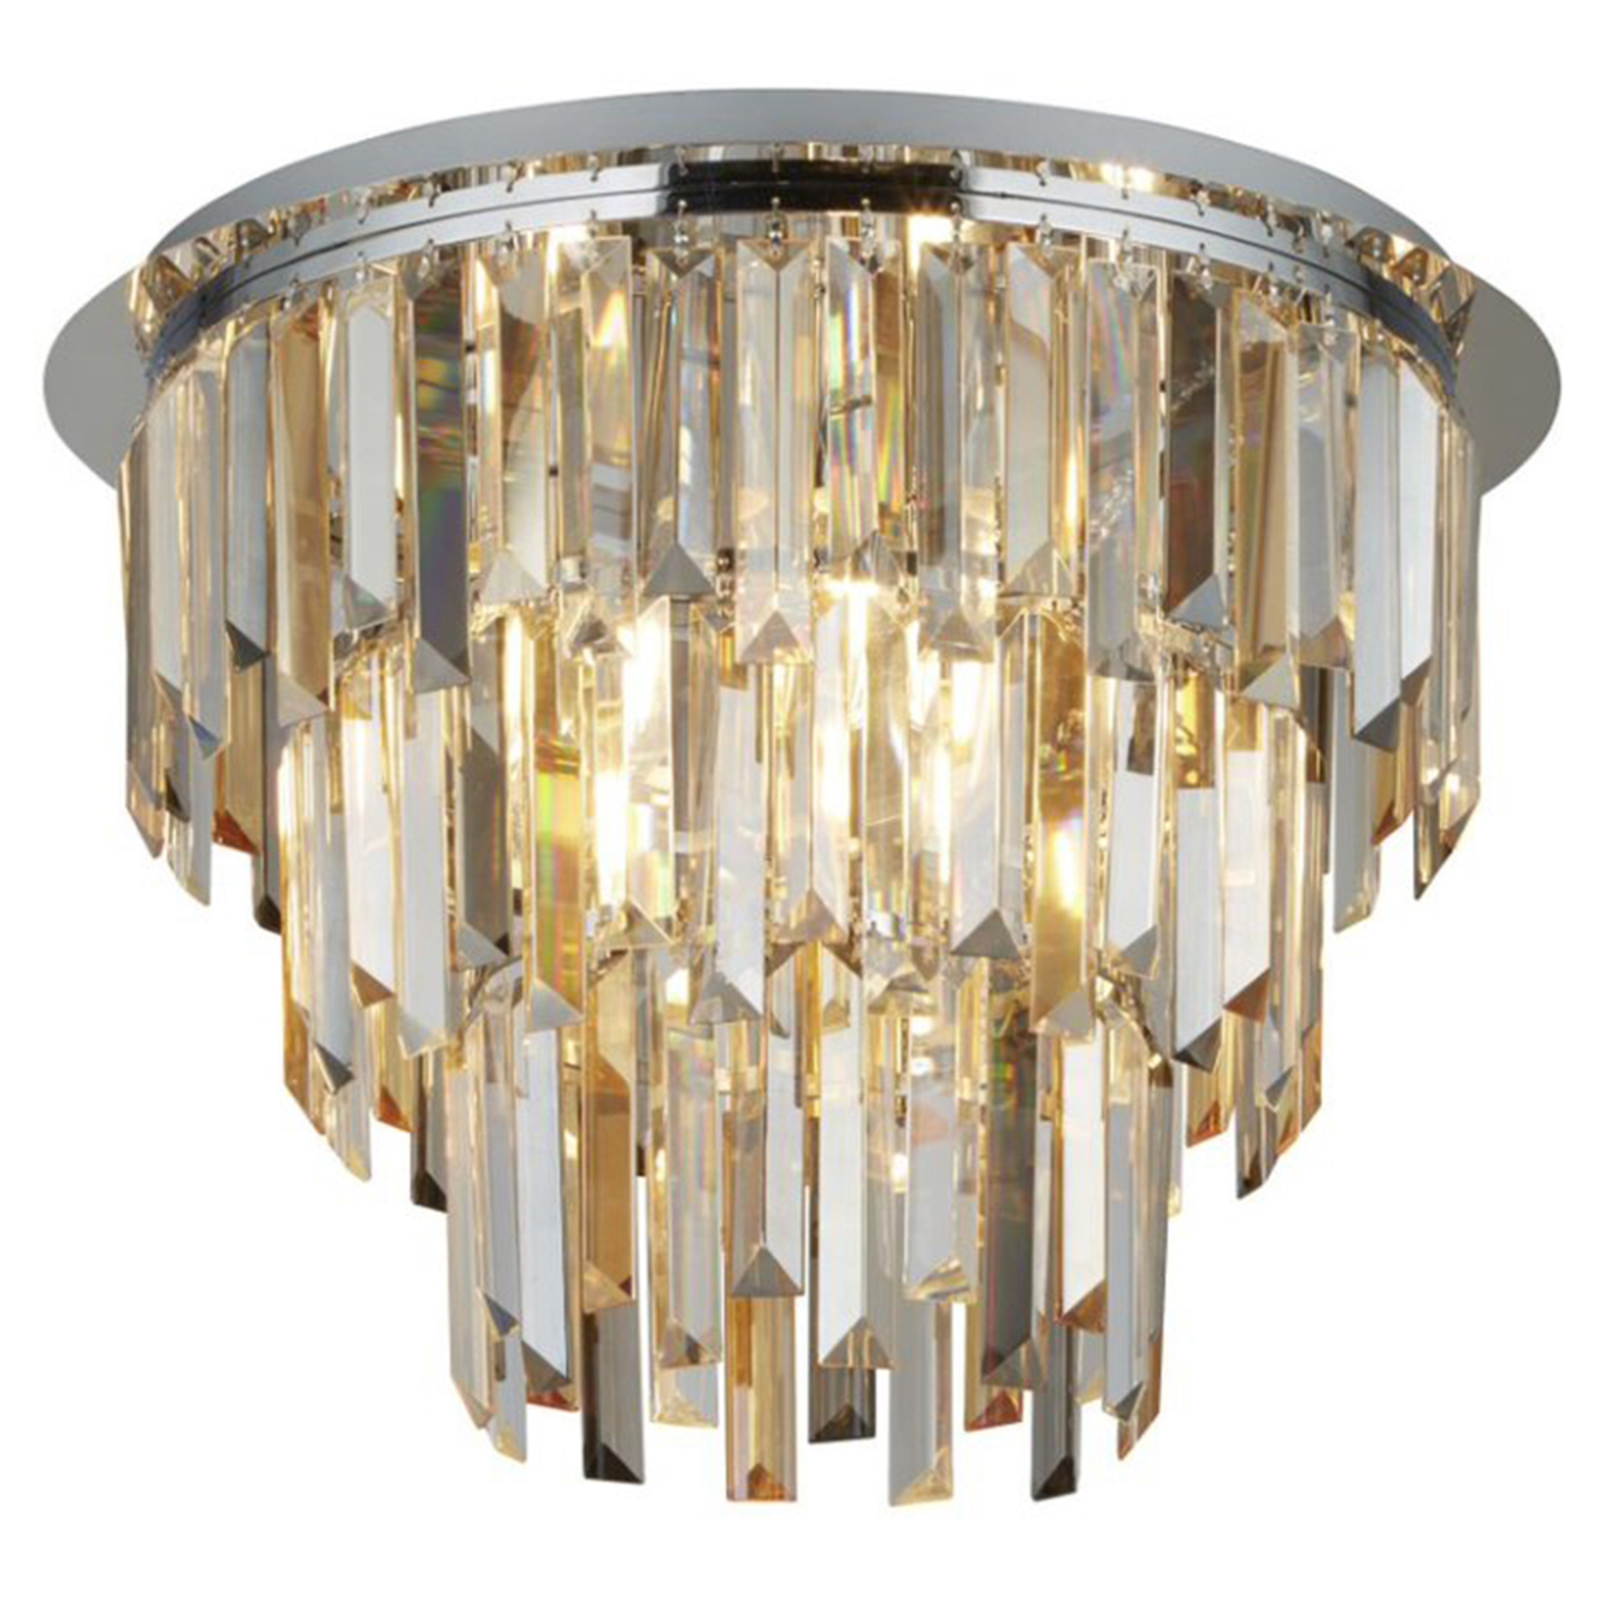 Clarissa ceiling light with crystals